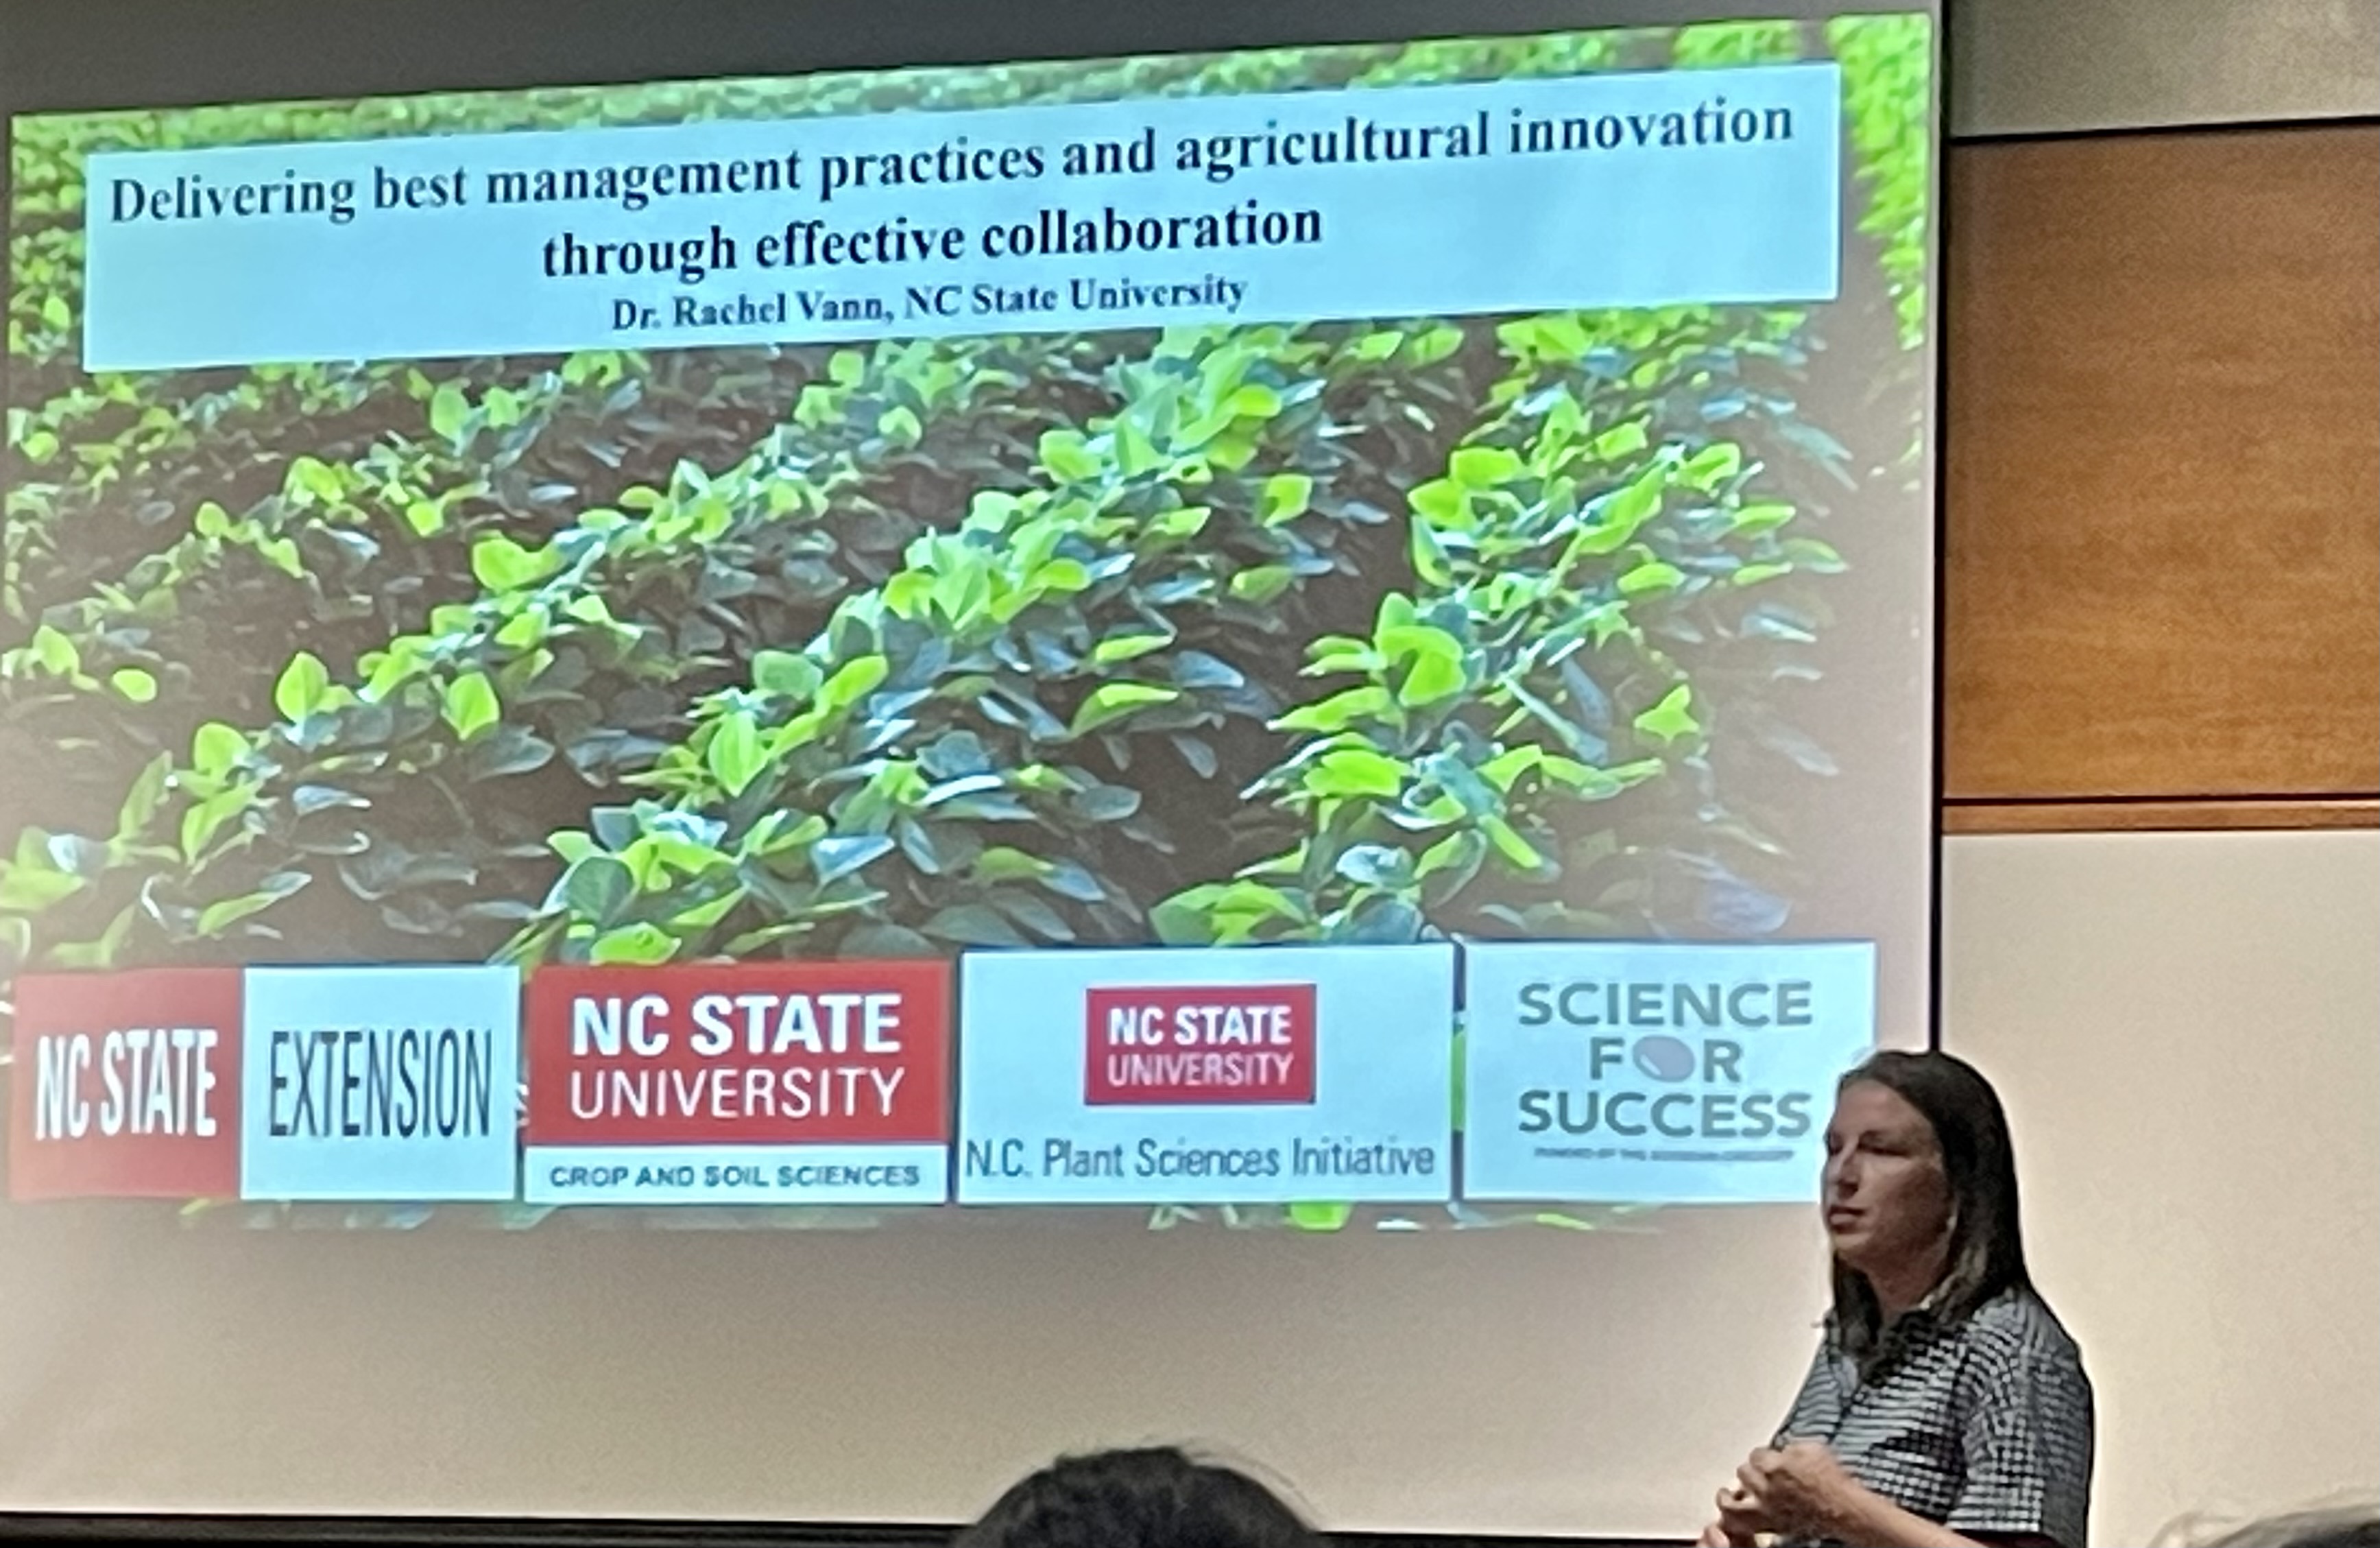 Rachel Vann gives a seminar in front of an image of soybean plants